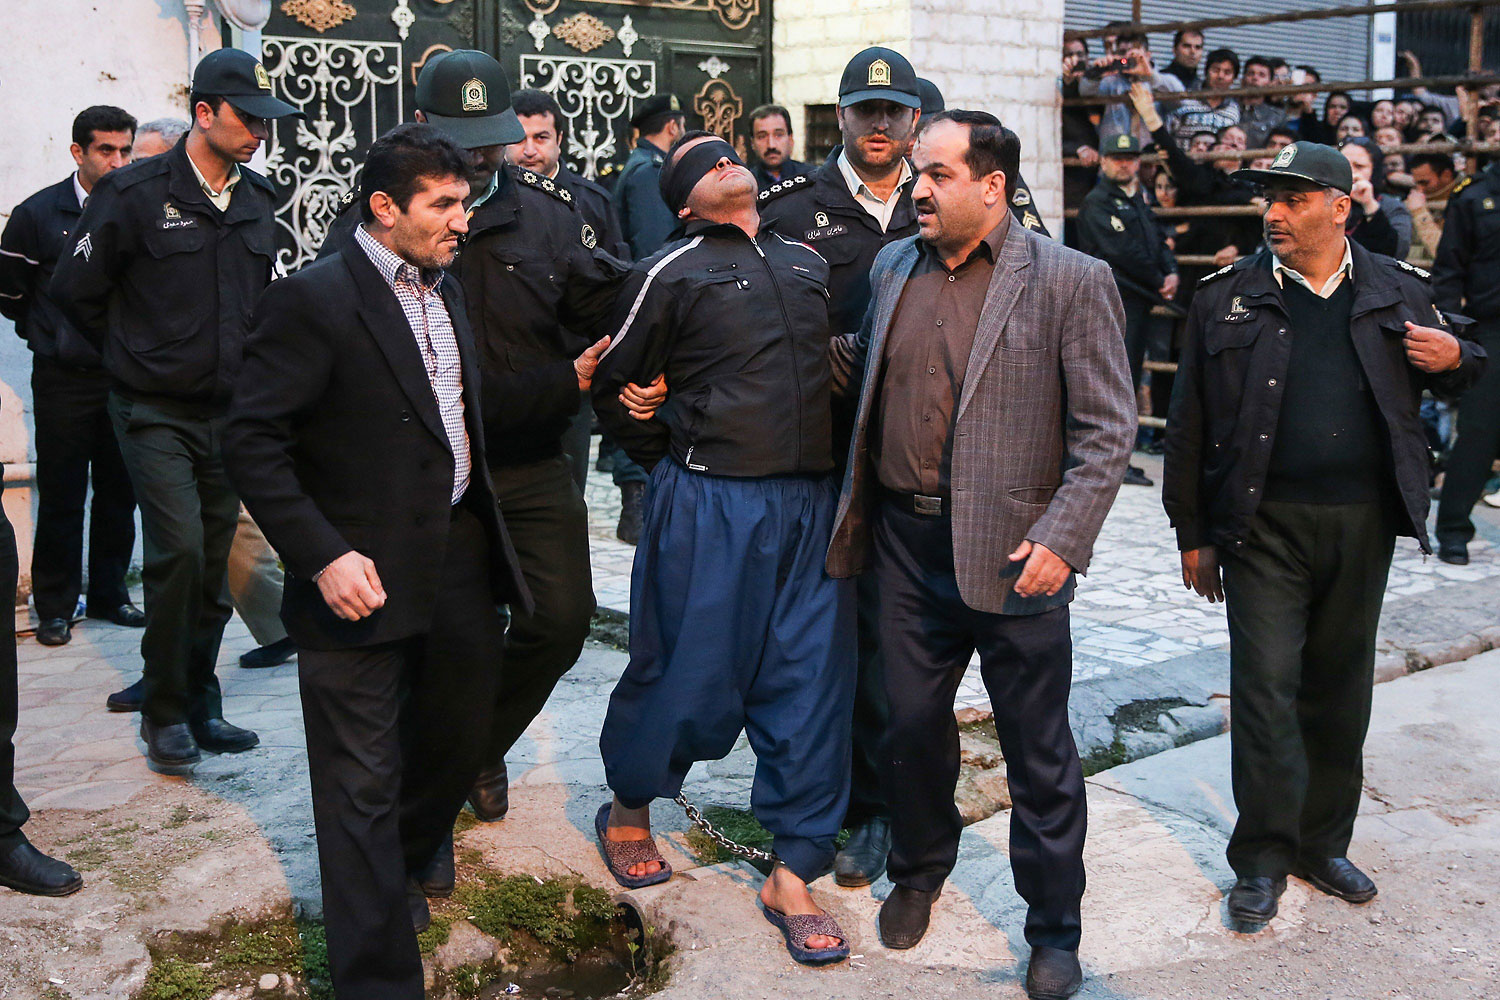 Balal, who killed an Iranian youth Abdolah Hosseinzadeh in a street fight with a knife in 2007, is brought to the gallows by judicial officals during his execution ceremony in the northern city of Nowshahr on April 15, 2014.